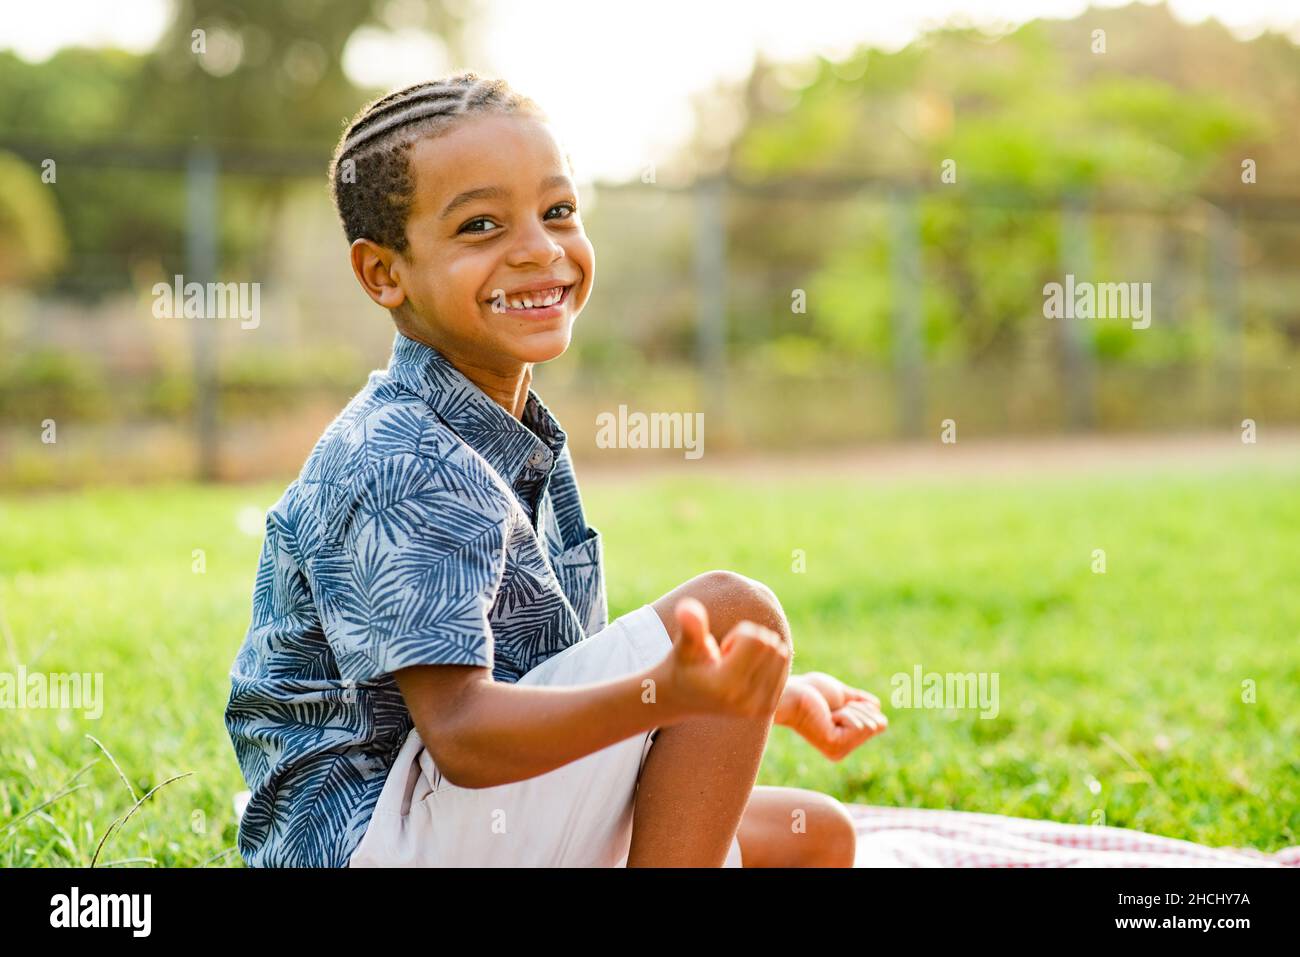 Delighted black kid smiling at camera during picnic Stock Photo